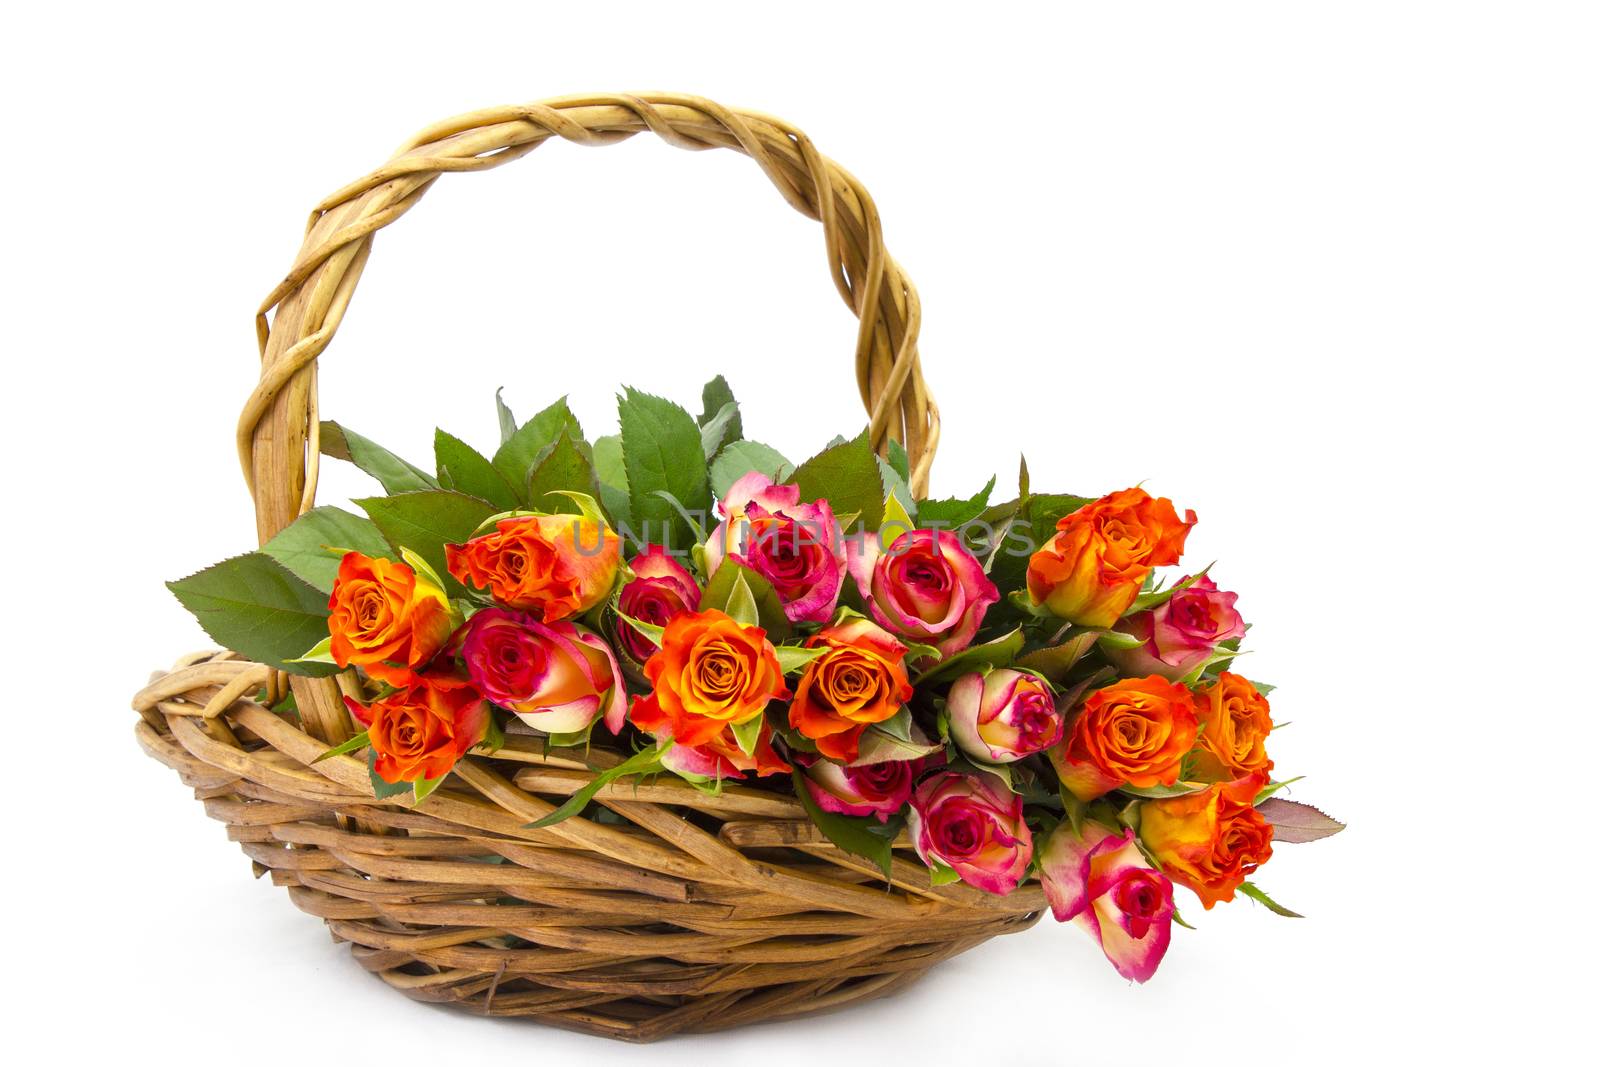 roses in a basket on white background by miradrozdowski